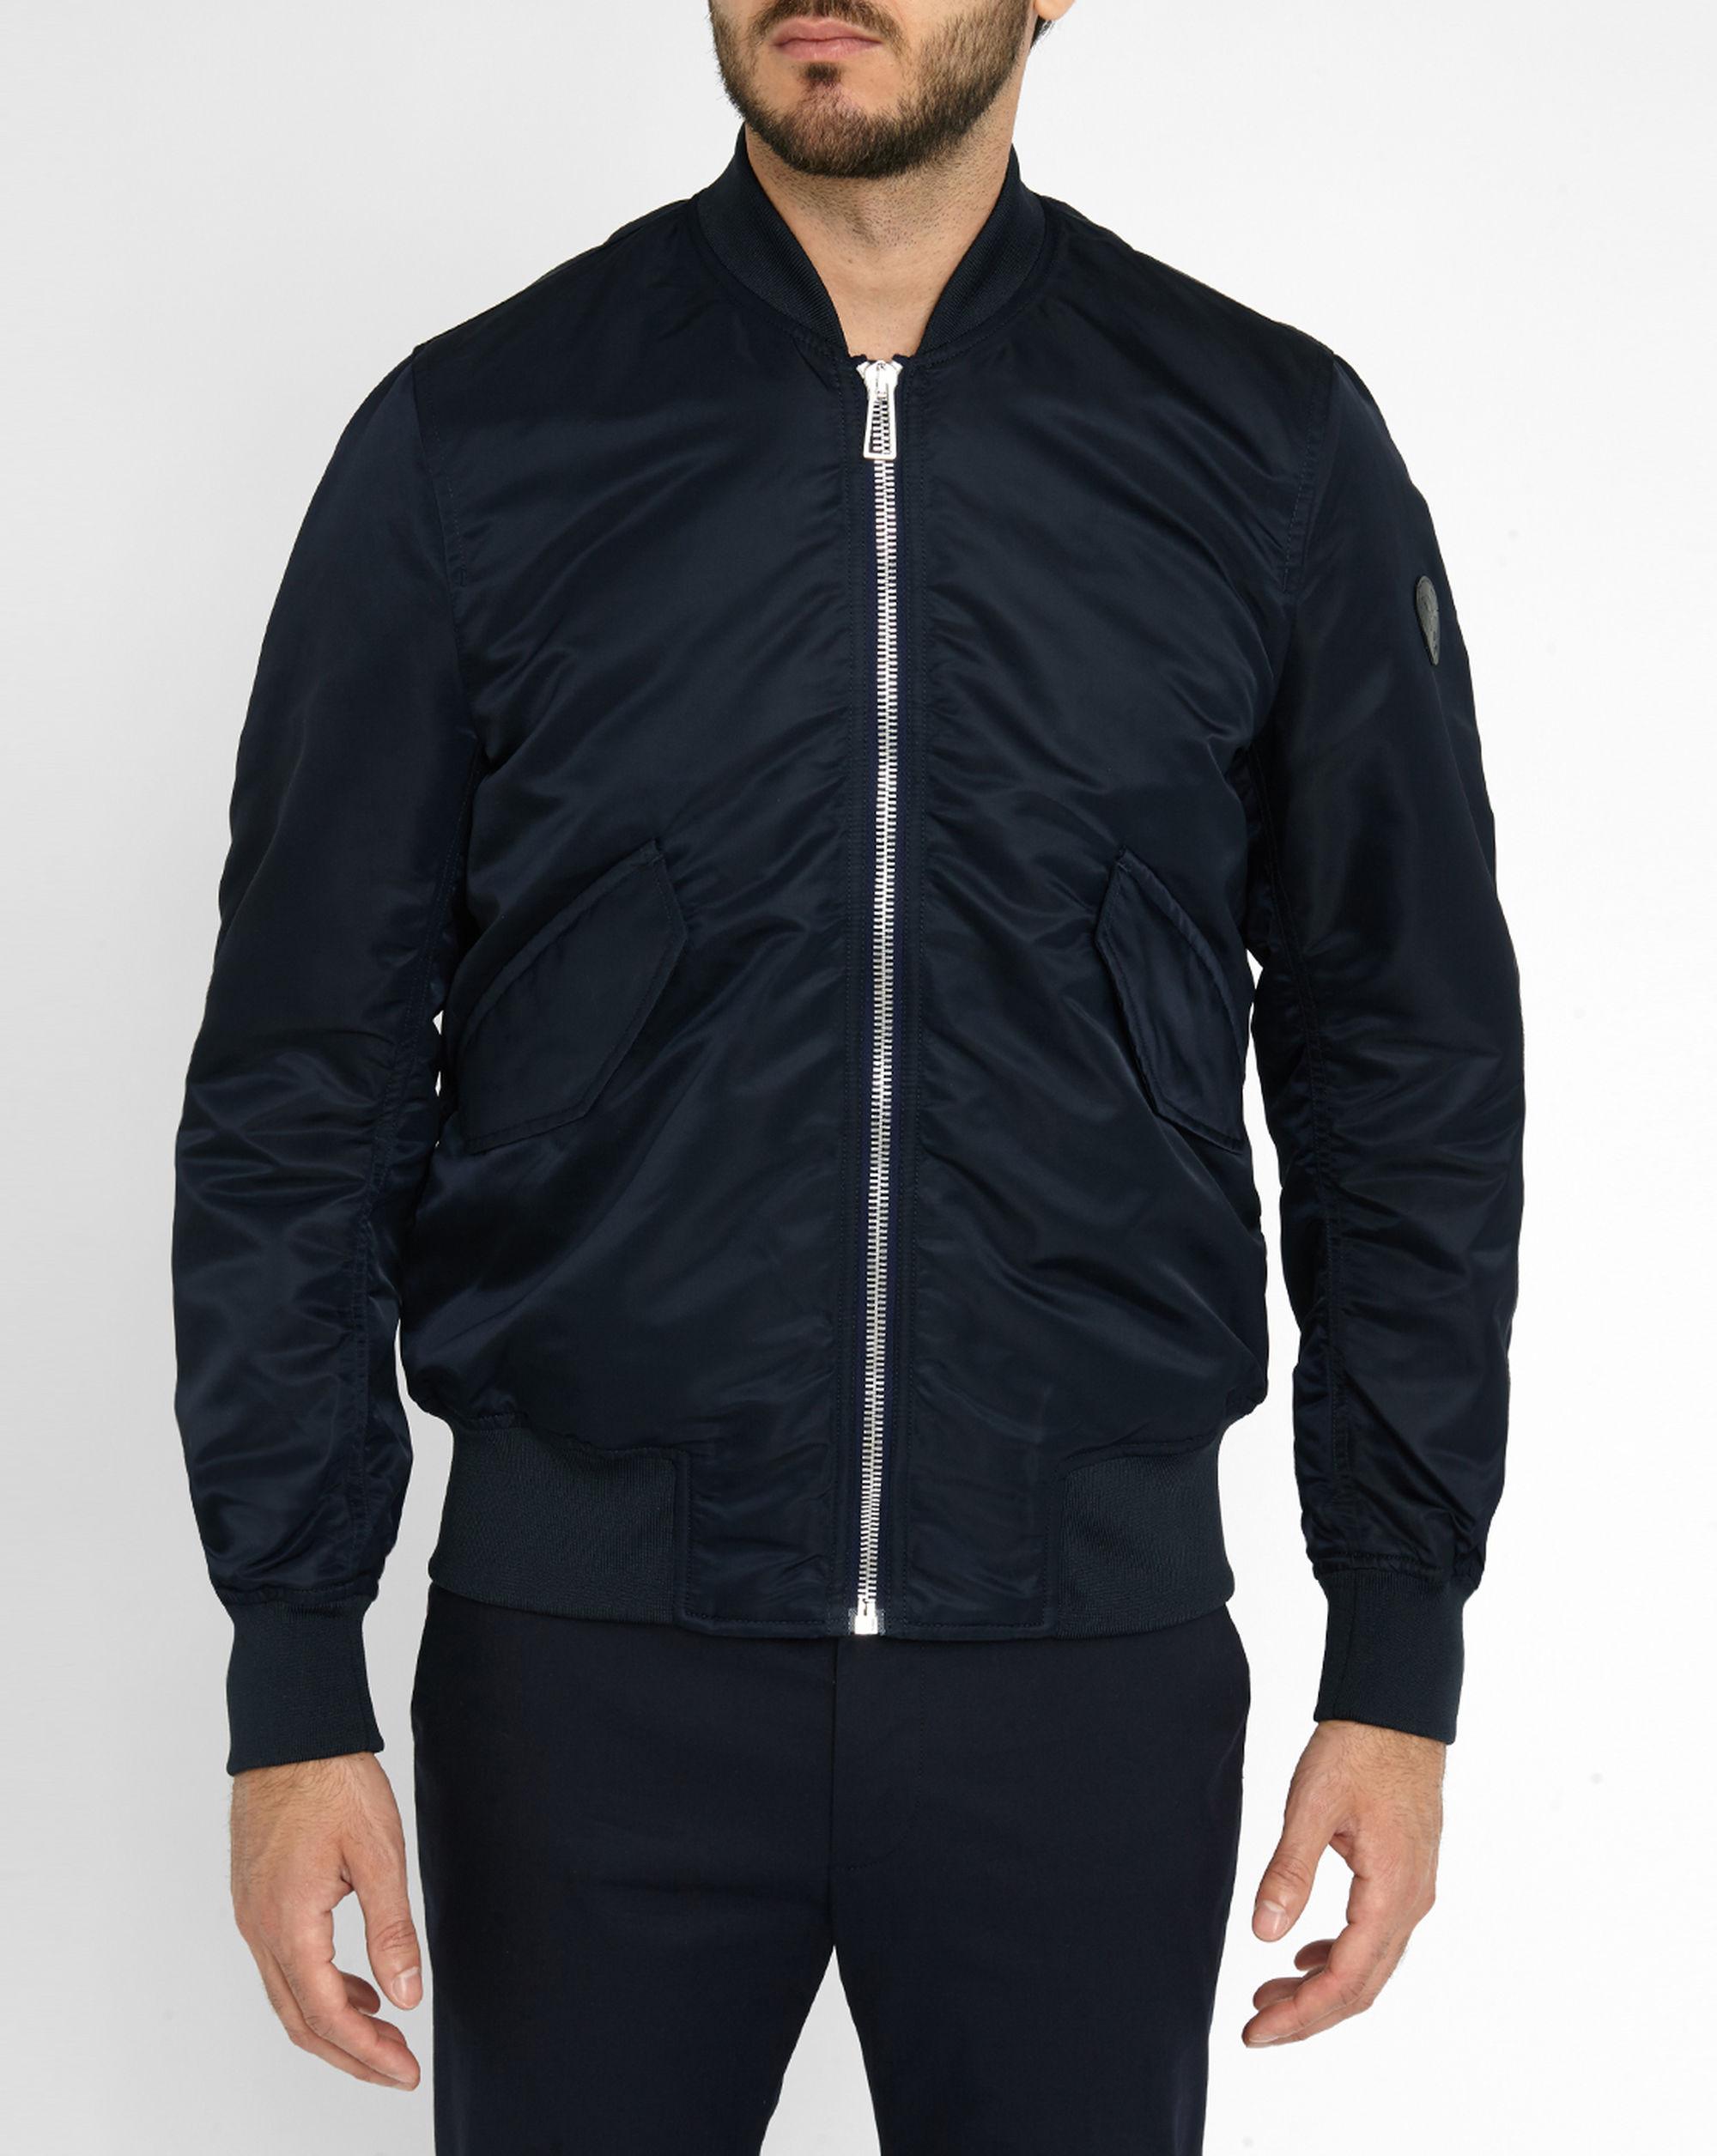 Ps by paul smith Navy Nylon Bomber Jacket in Blue for Men | Lyst